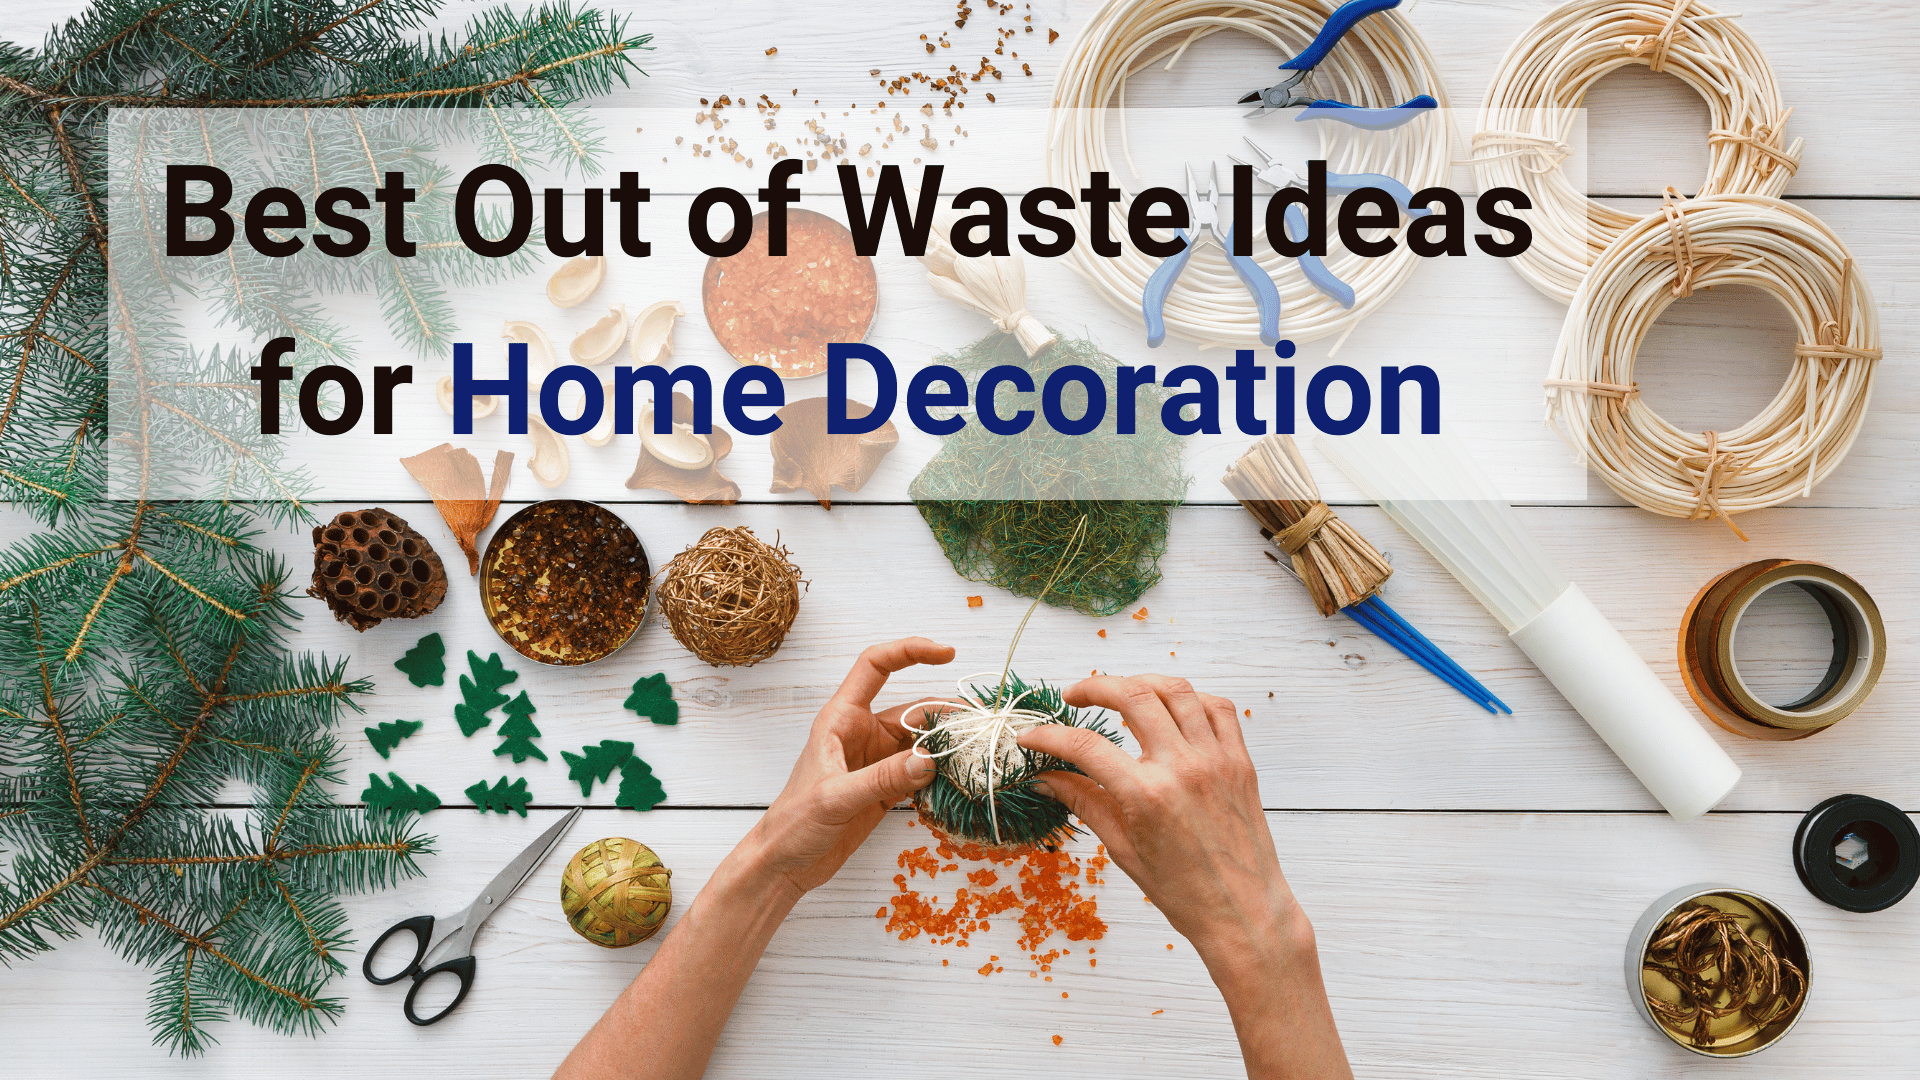 Best Out of Waste Ideas for Home Decoration